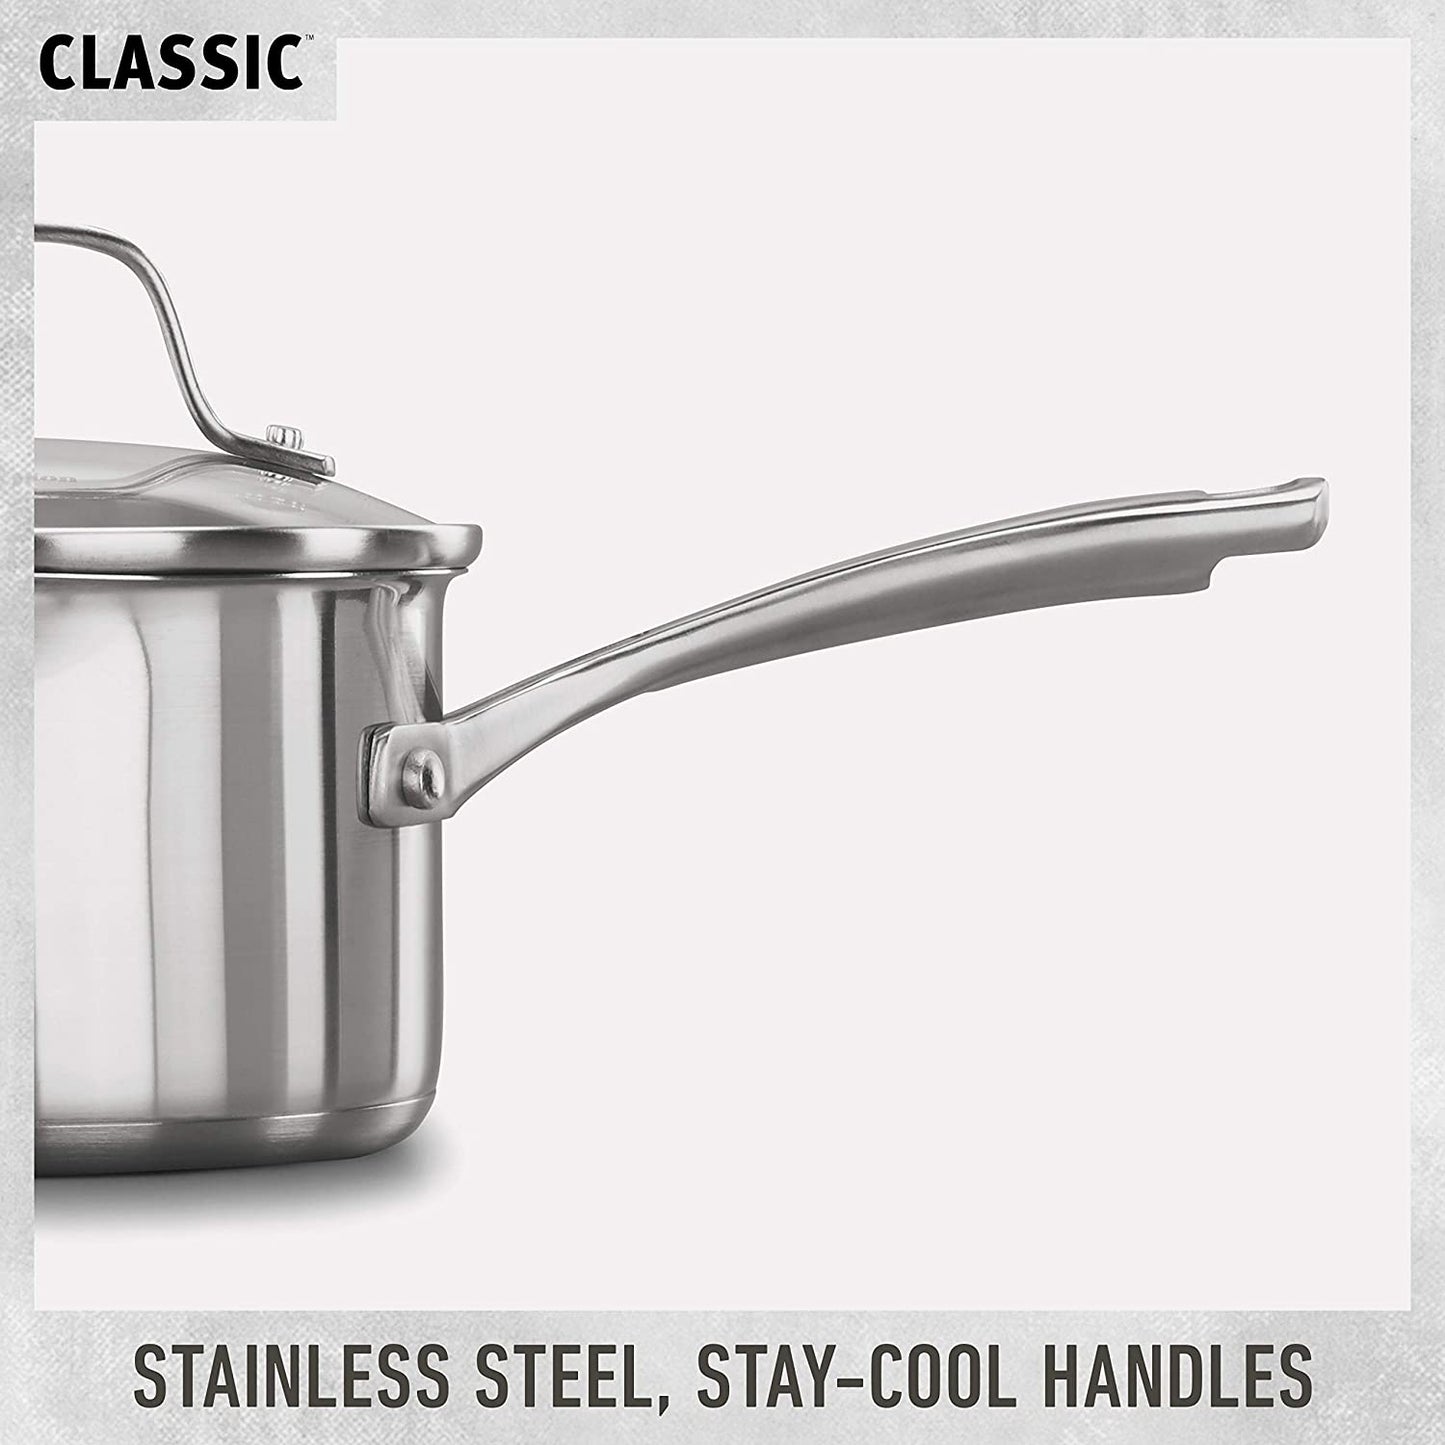 10-Piece Stainless Steel Pots and Pans Set